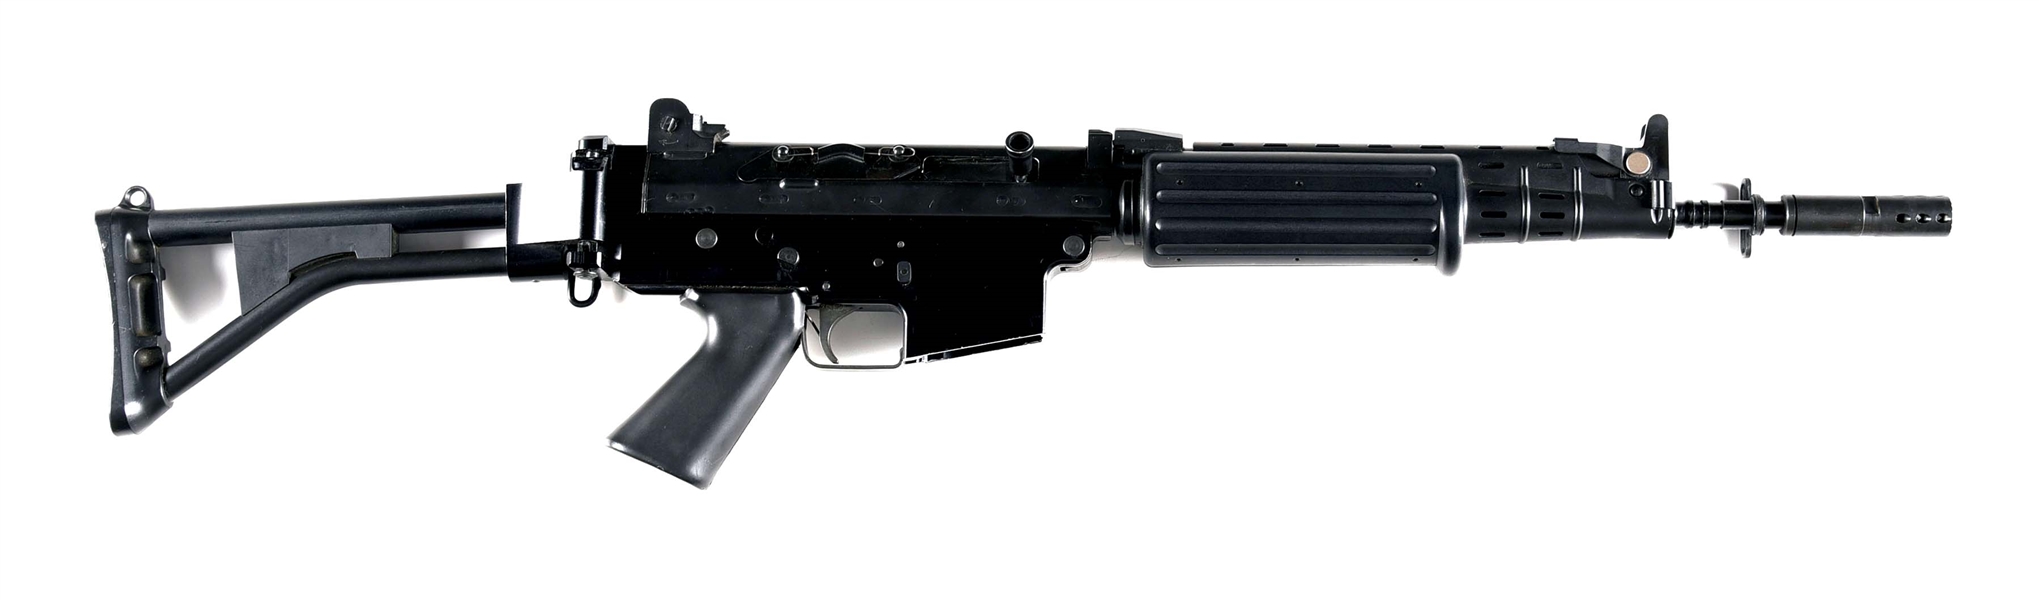 (N) FOLDING STOCK FABRIQUE NATIONALE FNC HOST GUN WITH S & H ARMS AUTO SEAR MACHINE GUN (FULLY TRANSFERABLE).